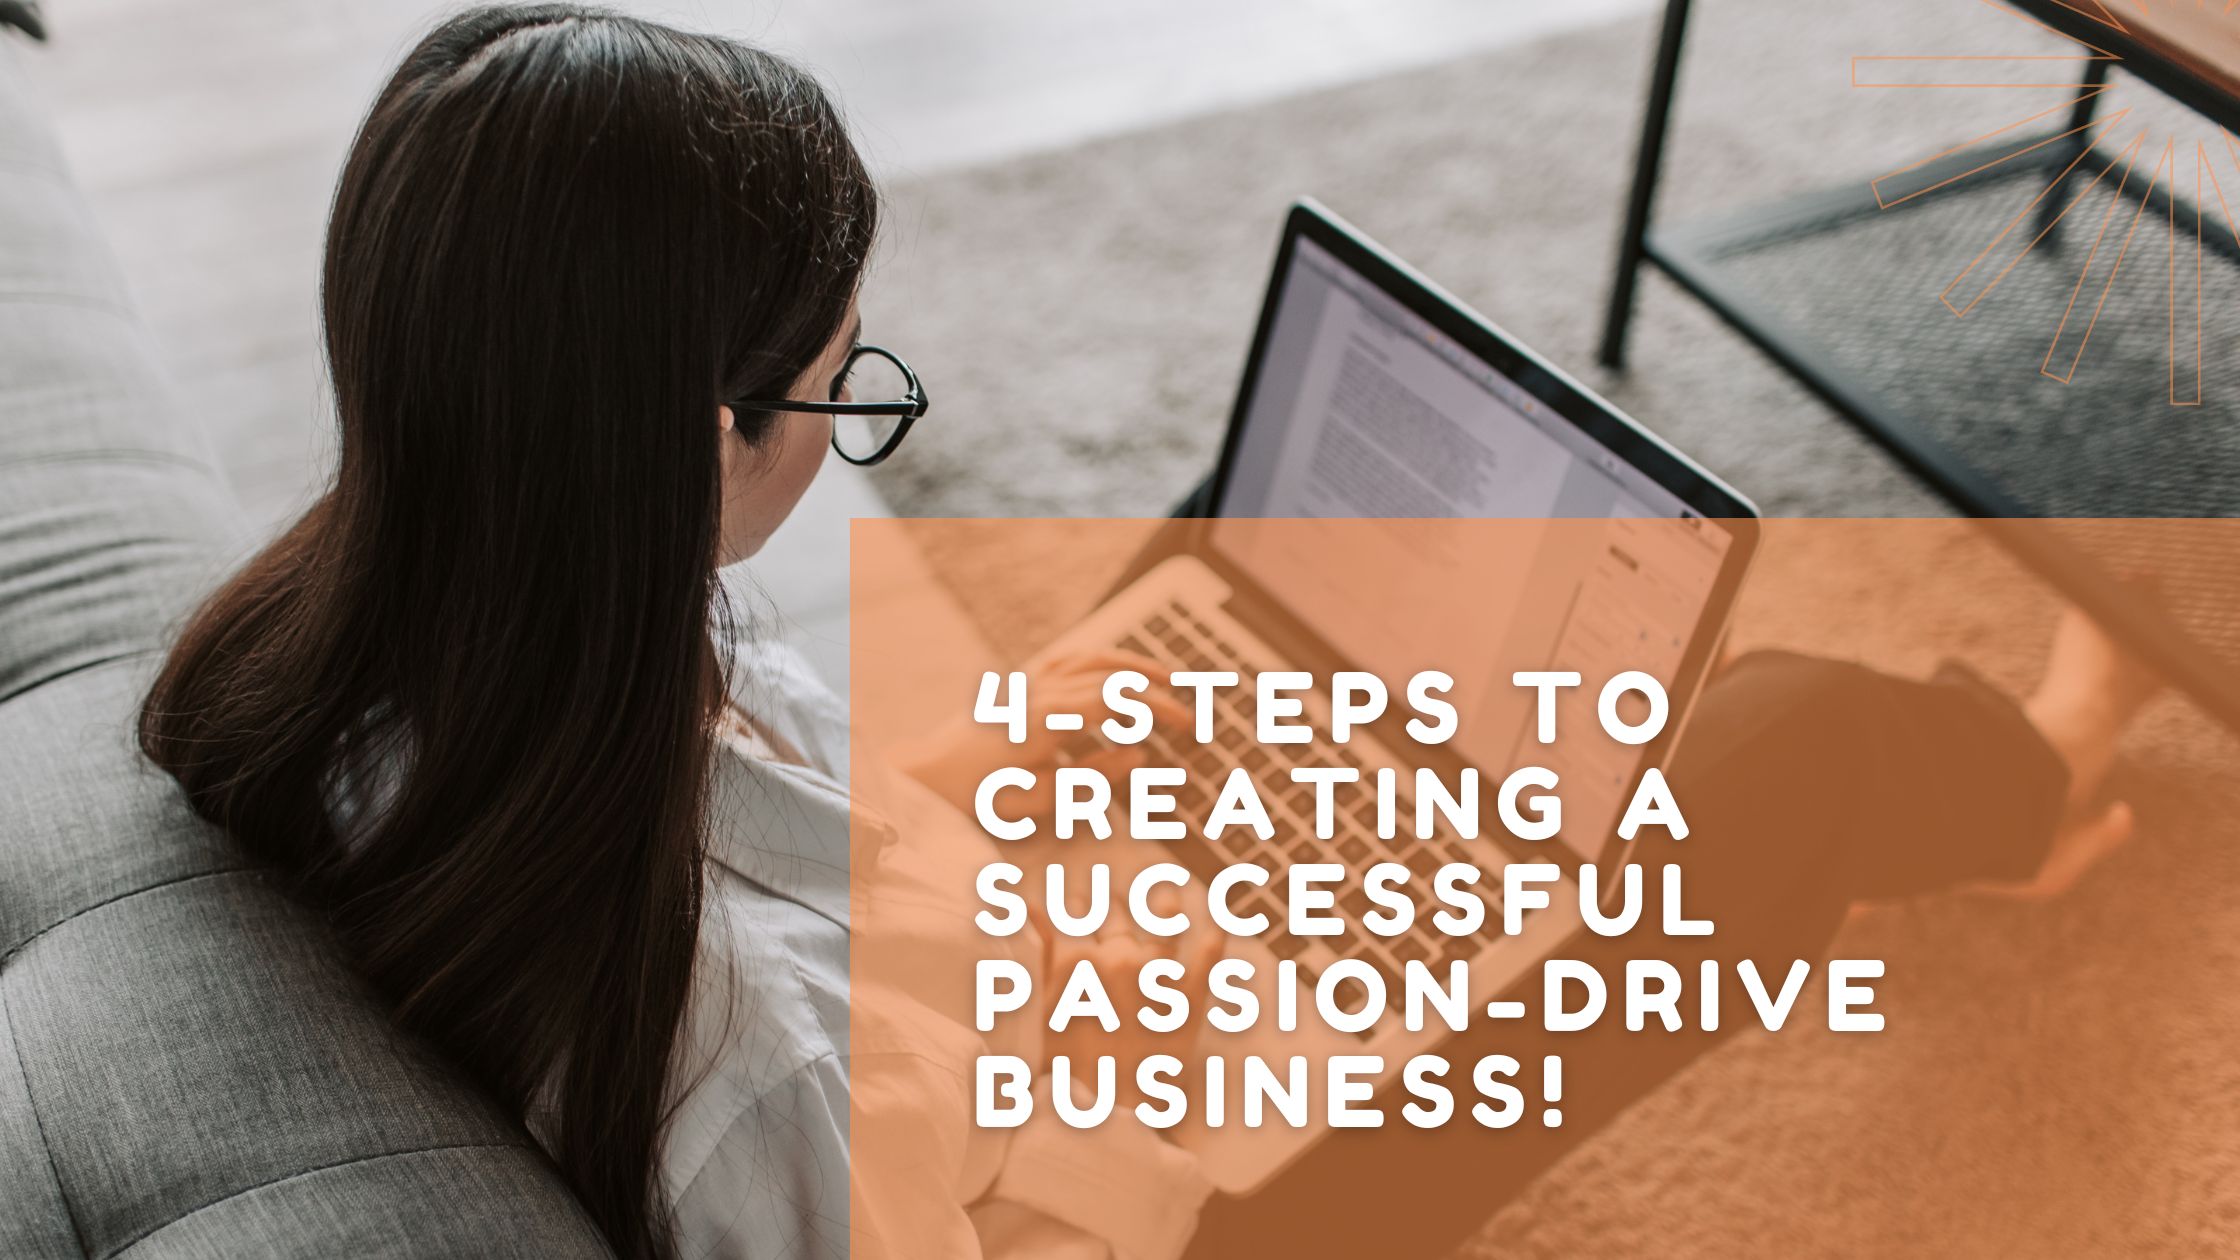 4-Steps to Creating a Successful Passion-Drive Business!